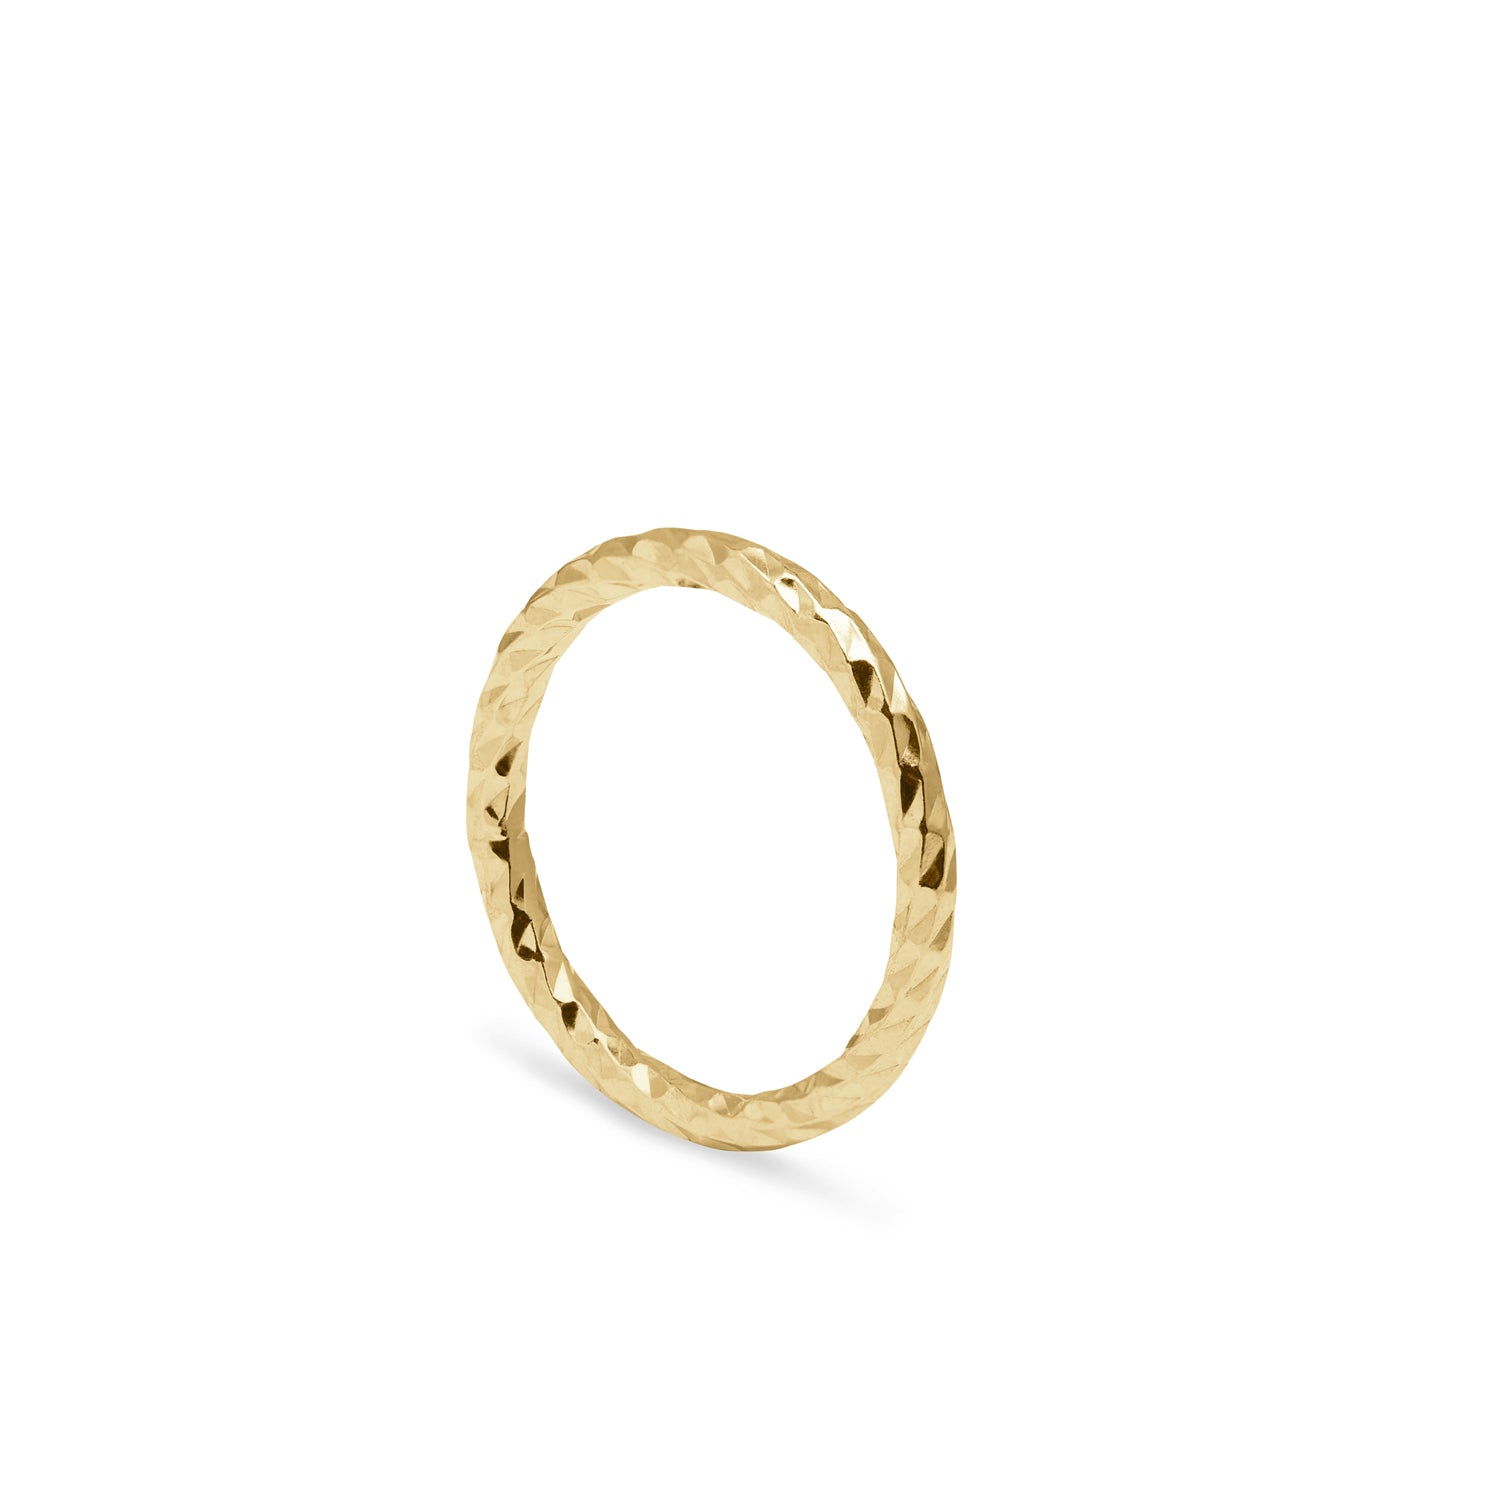 Faceted Diamond Band - Gold - Myia Bonner Jewellery